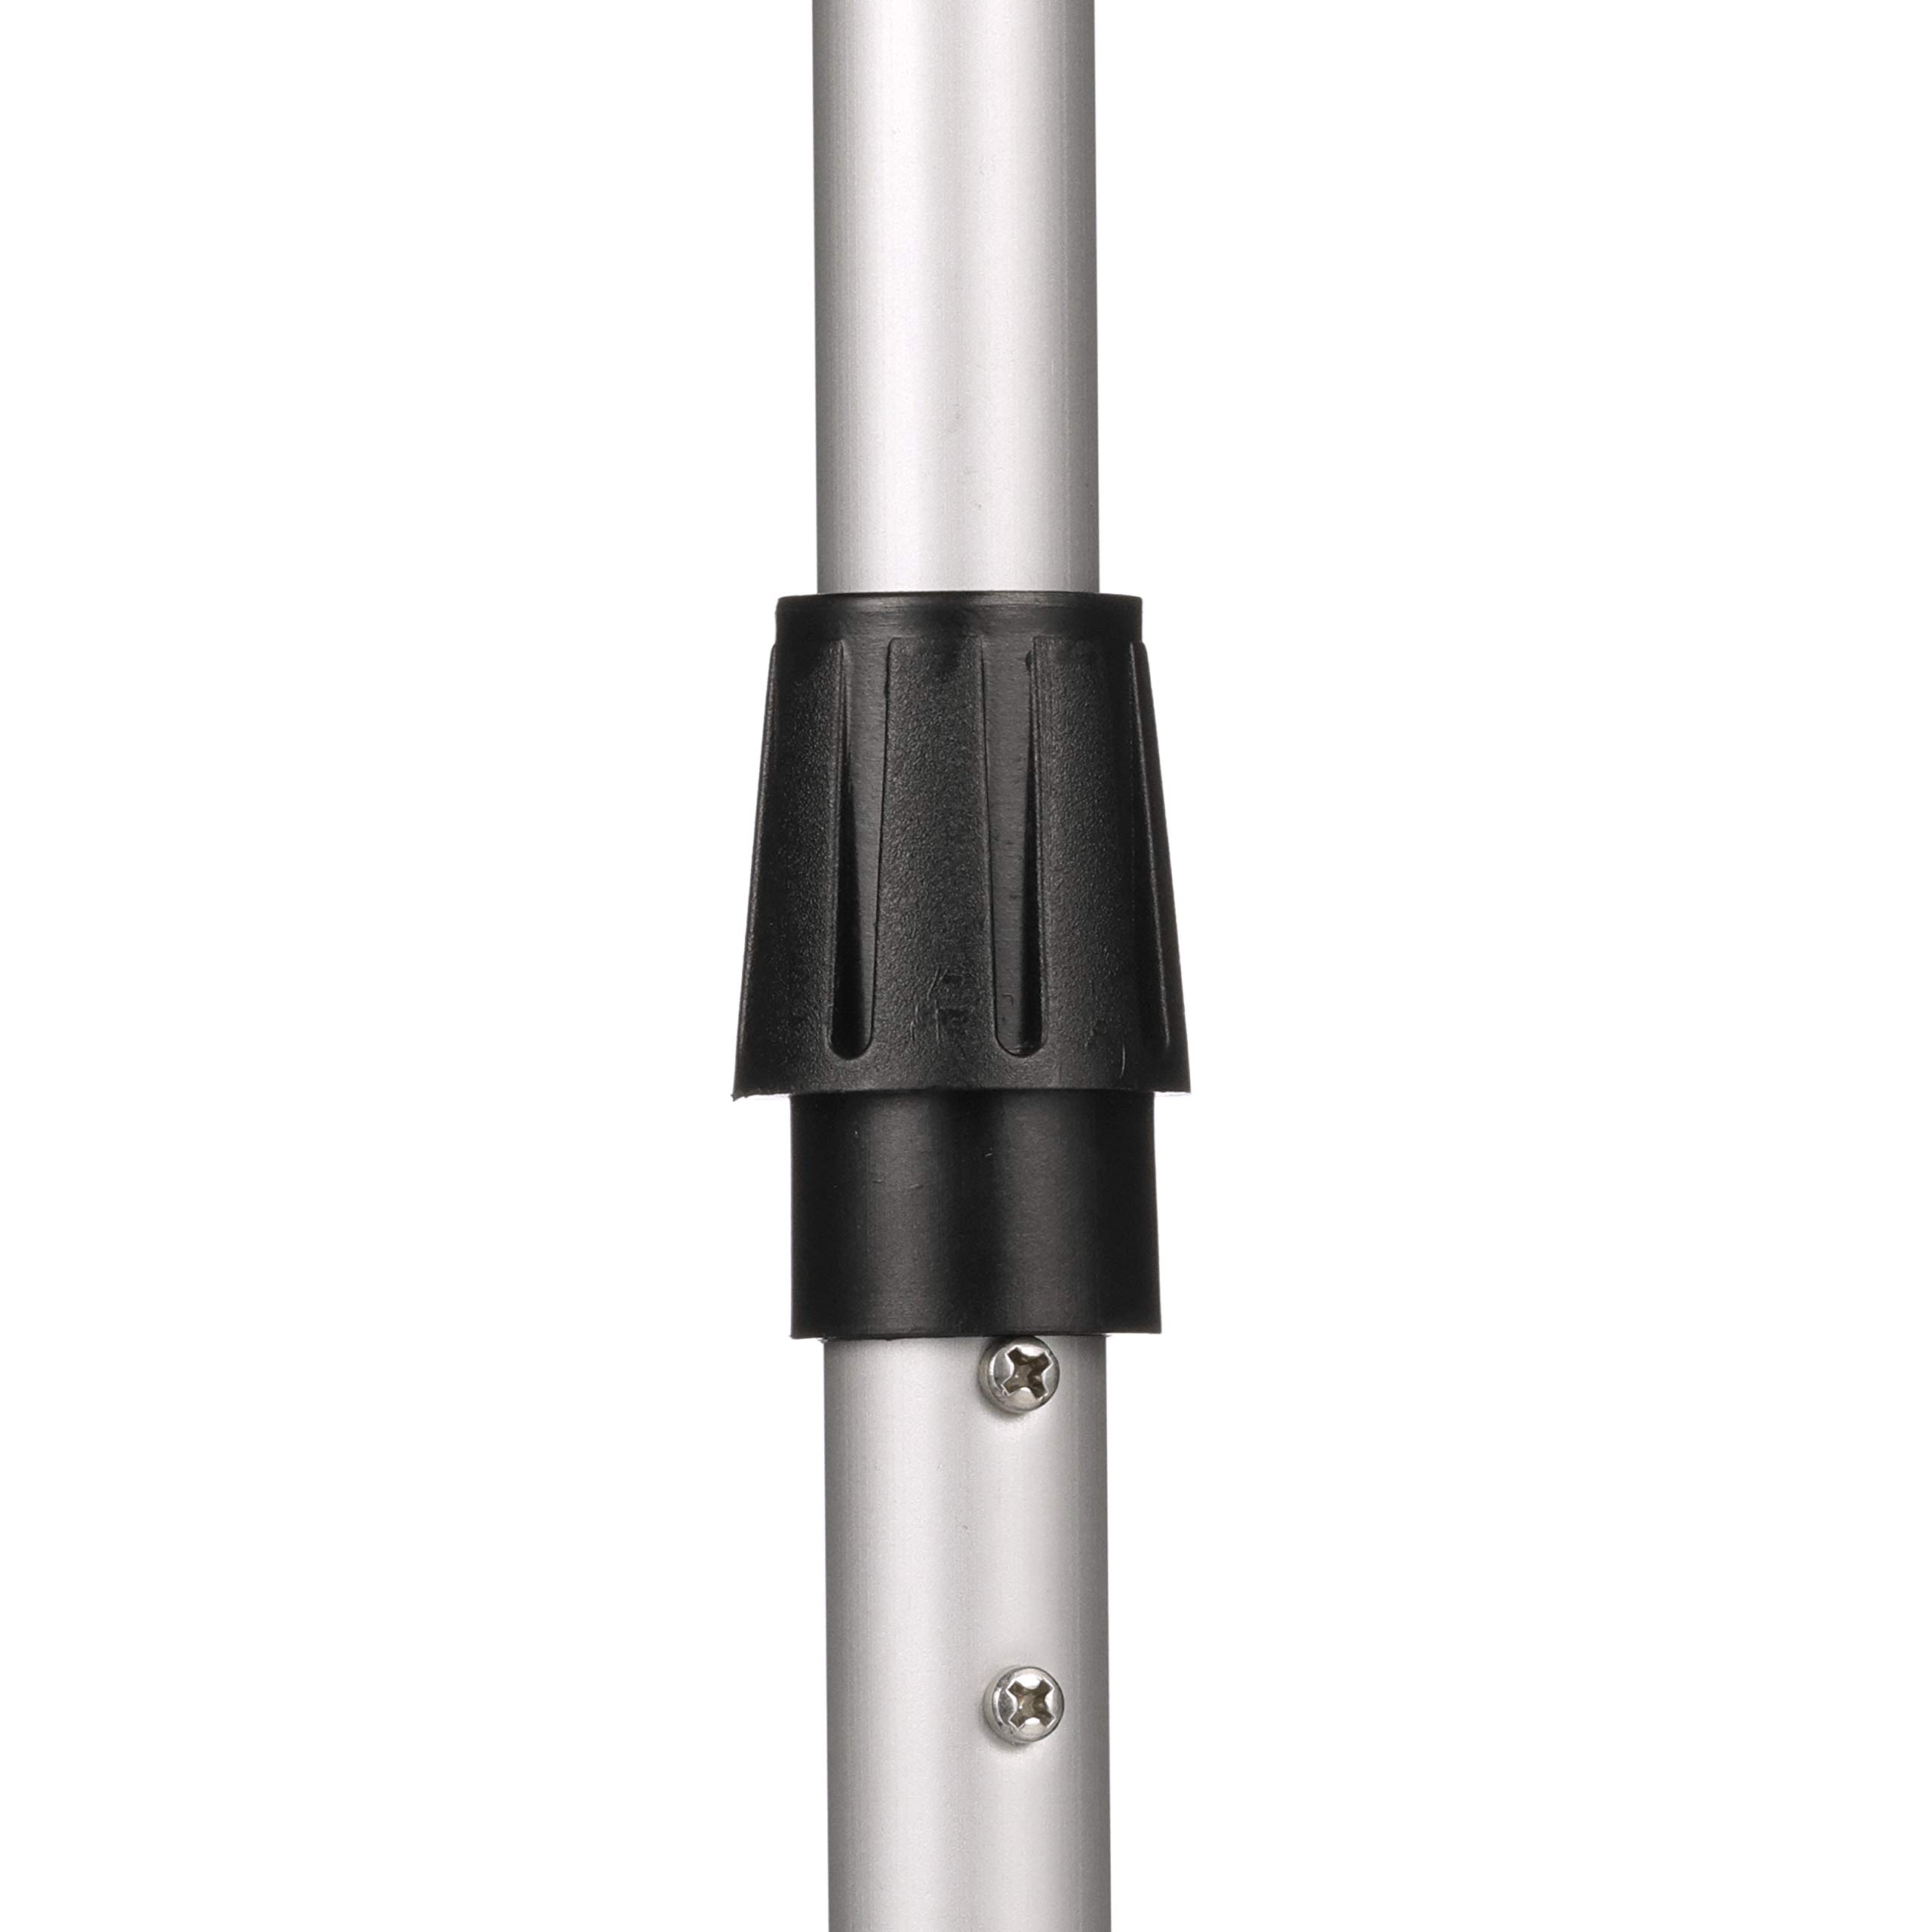 Attwood 5610-48-7 Telescoping Pole Light, All-Around Light, Height-Adjustable 26-42 inches, 2 Mile 360-Degree Visibility